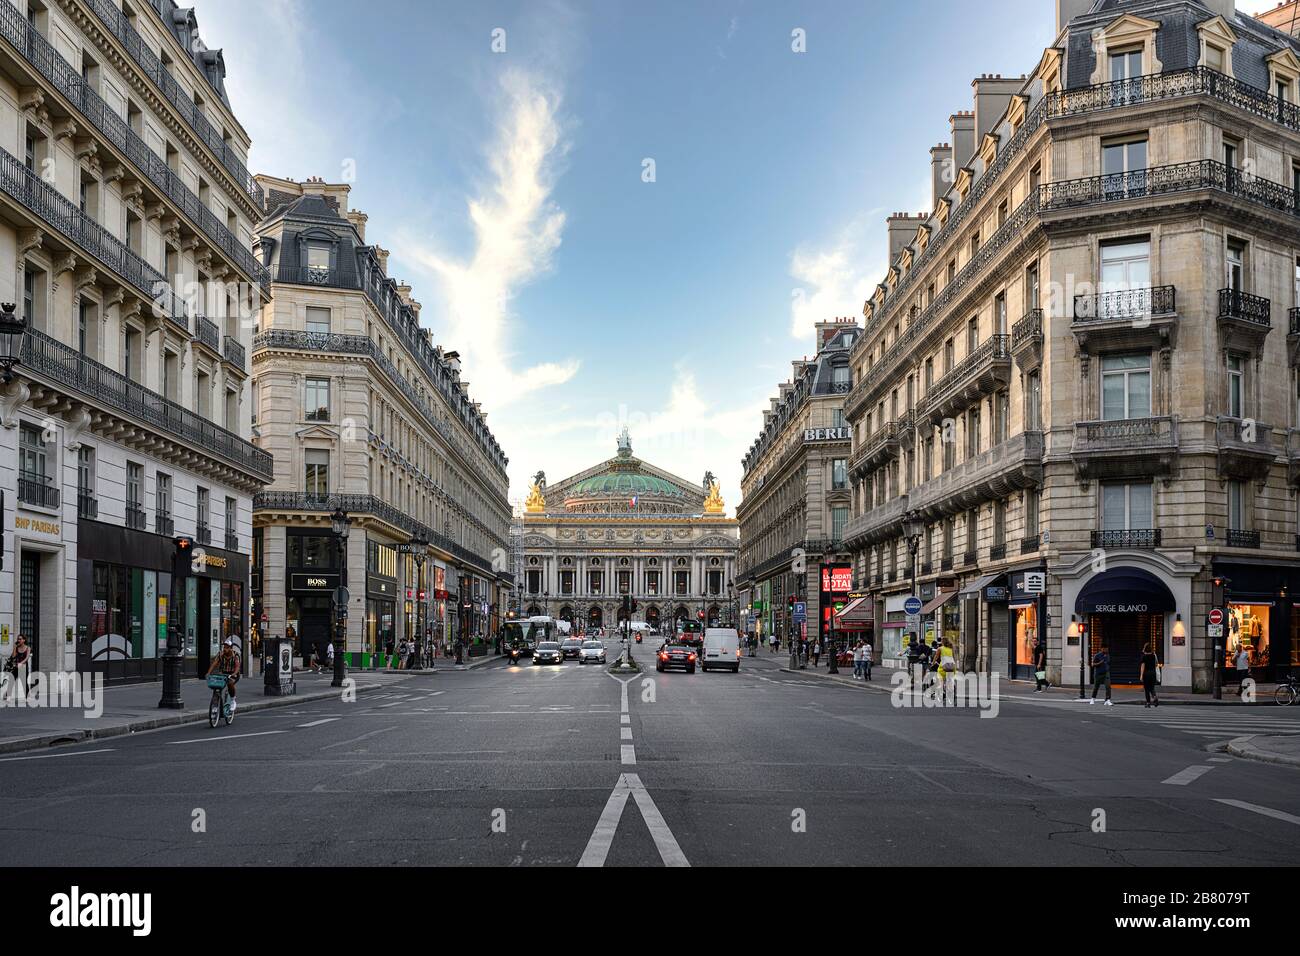 The scenic street view of the Palais Garnier Opera house in Paris Stock Photo